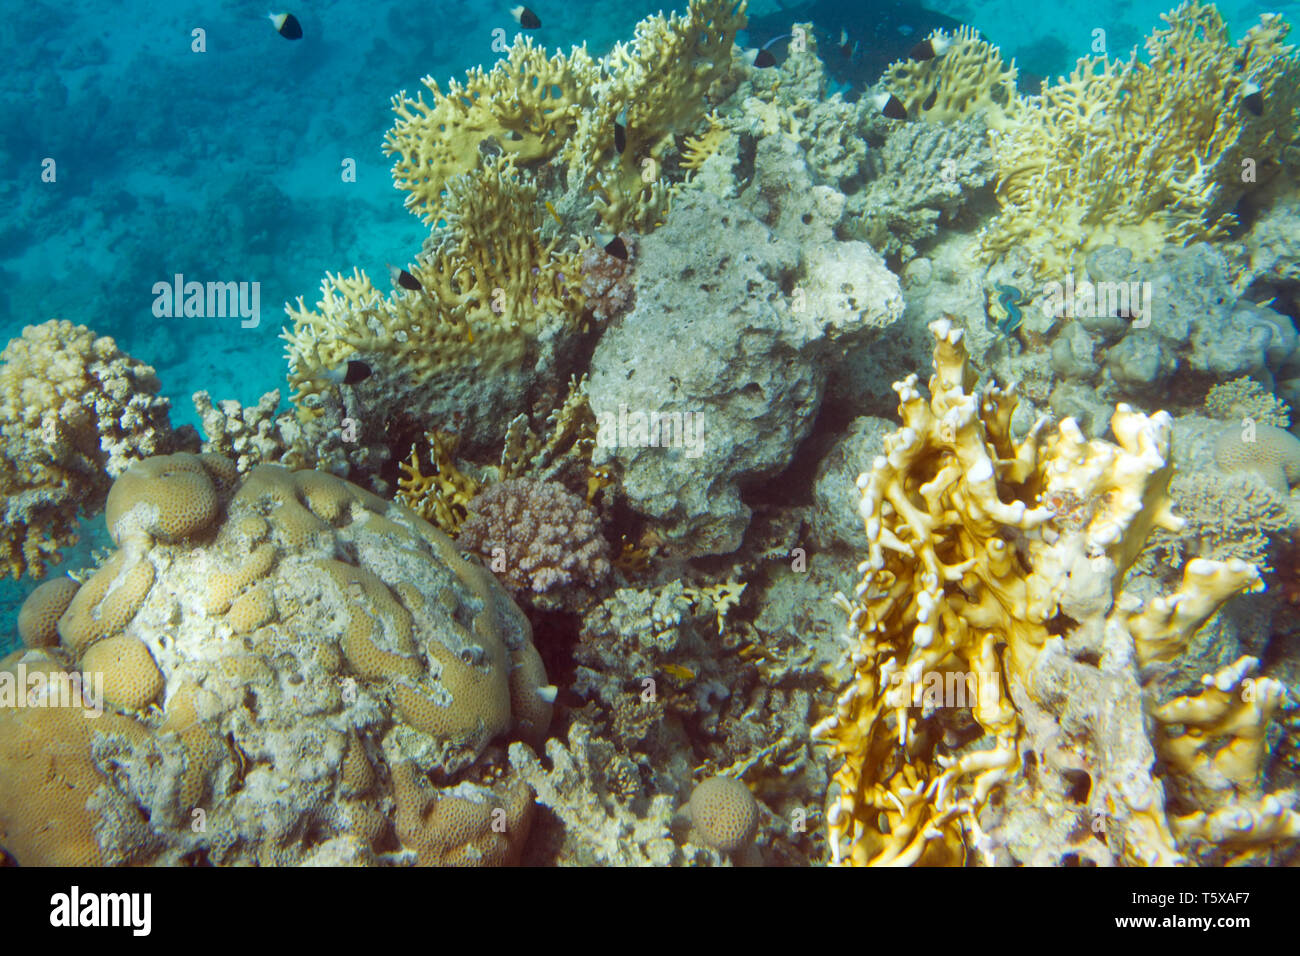 Millepora dichotoma coral and chromis dimidiata fish. Underwater life of Red sea in Egypt. Saltwater fishes and coral reef. Fire coral and bicolor pul Stock Photo